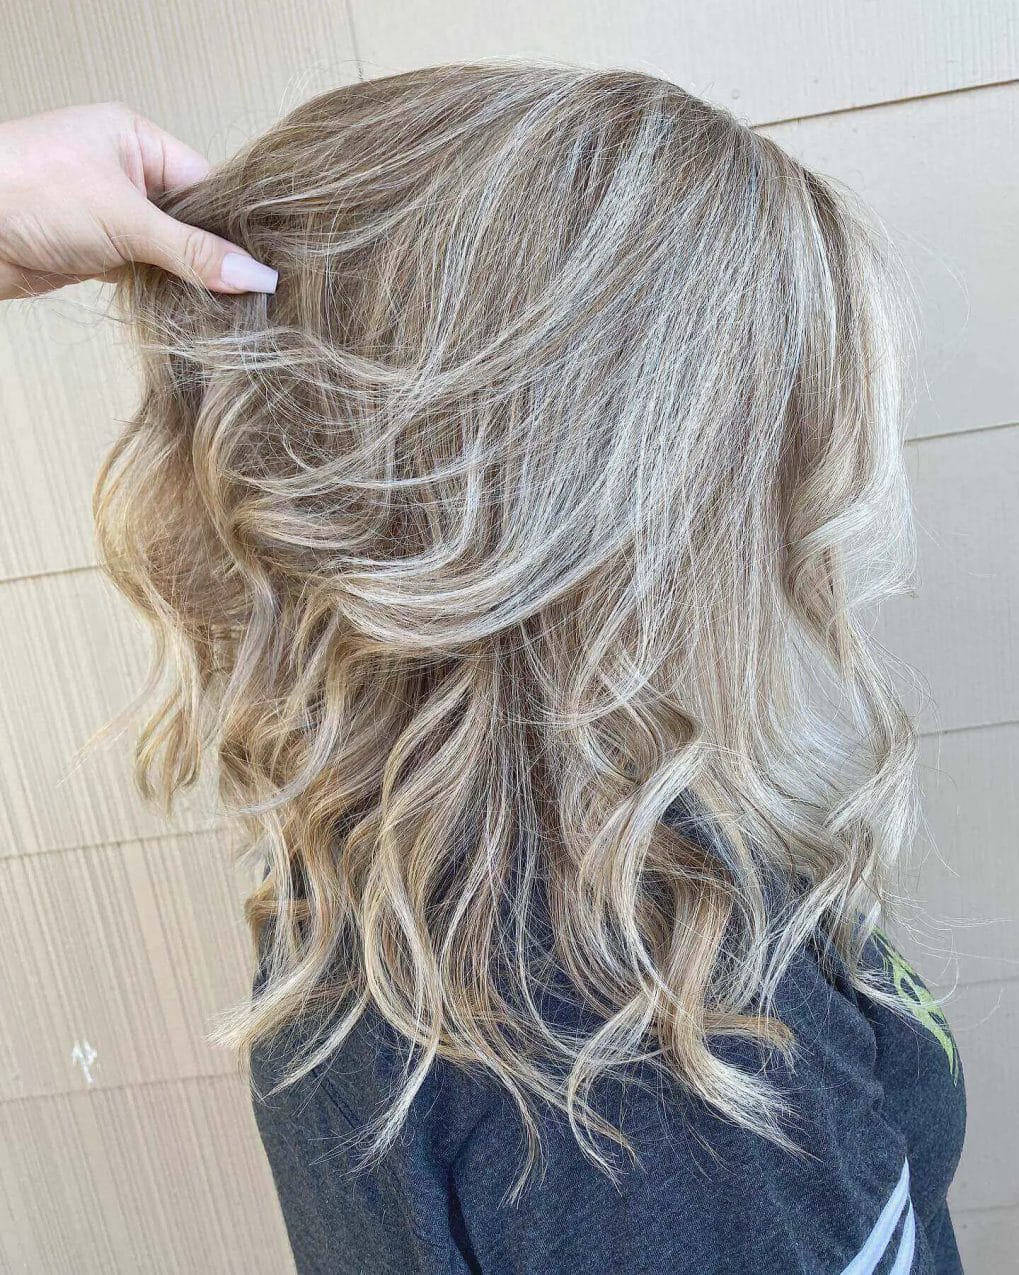 Beachy tousled waves with sun-kissed gray-blending highlights.